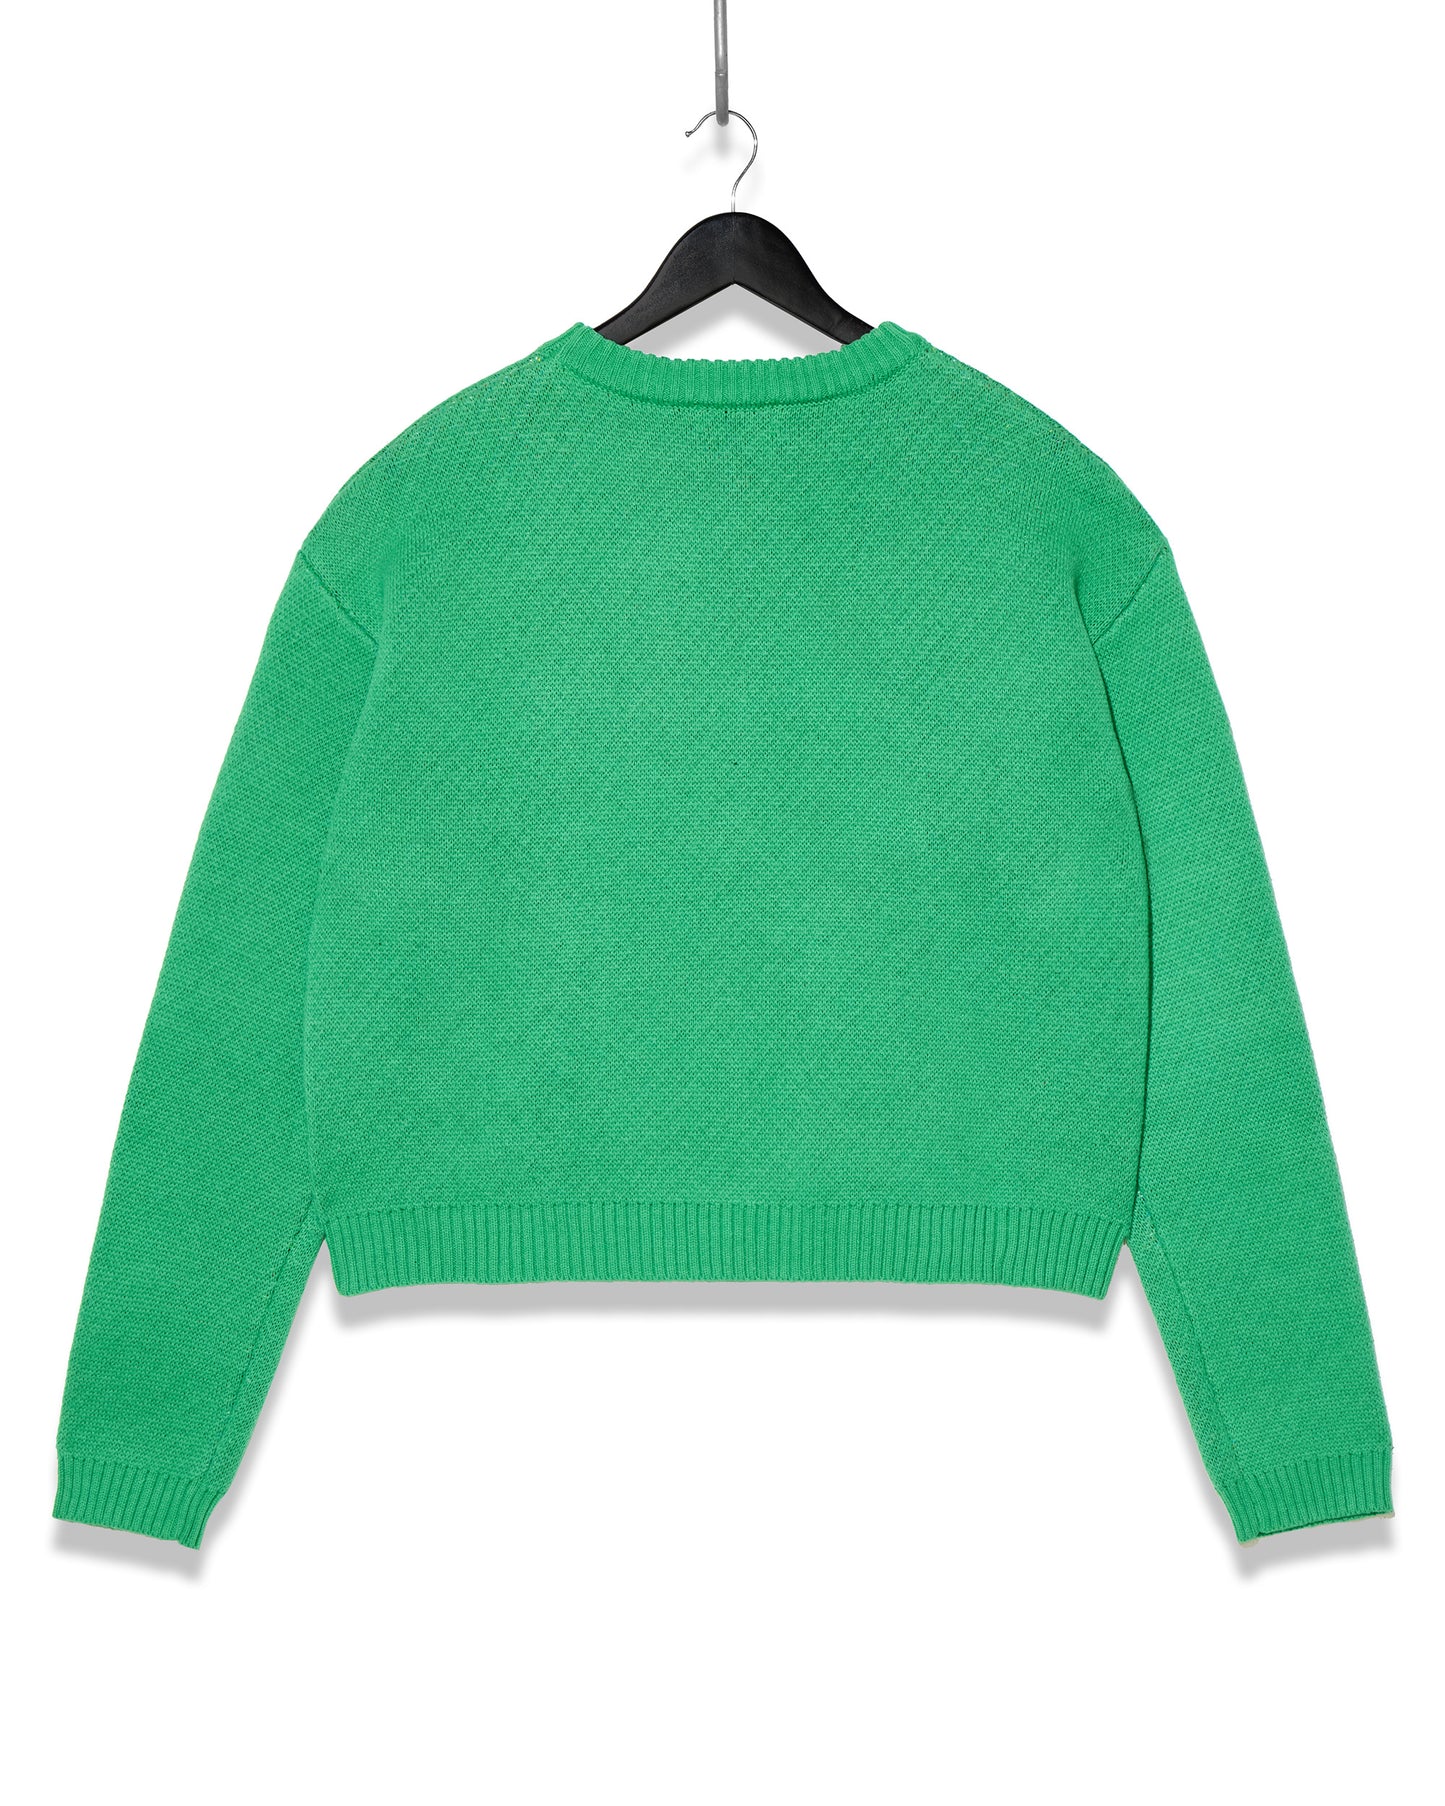 14 FOREST GREEN KNIT